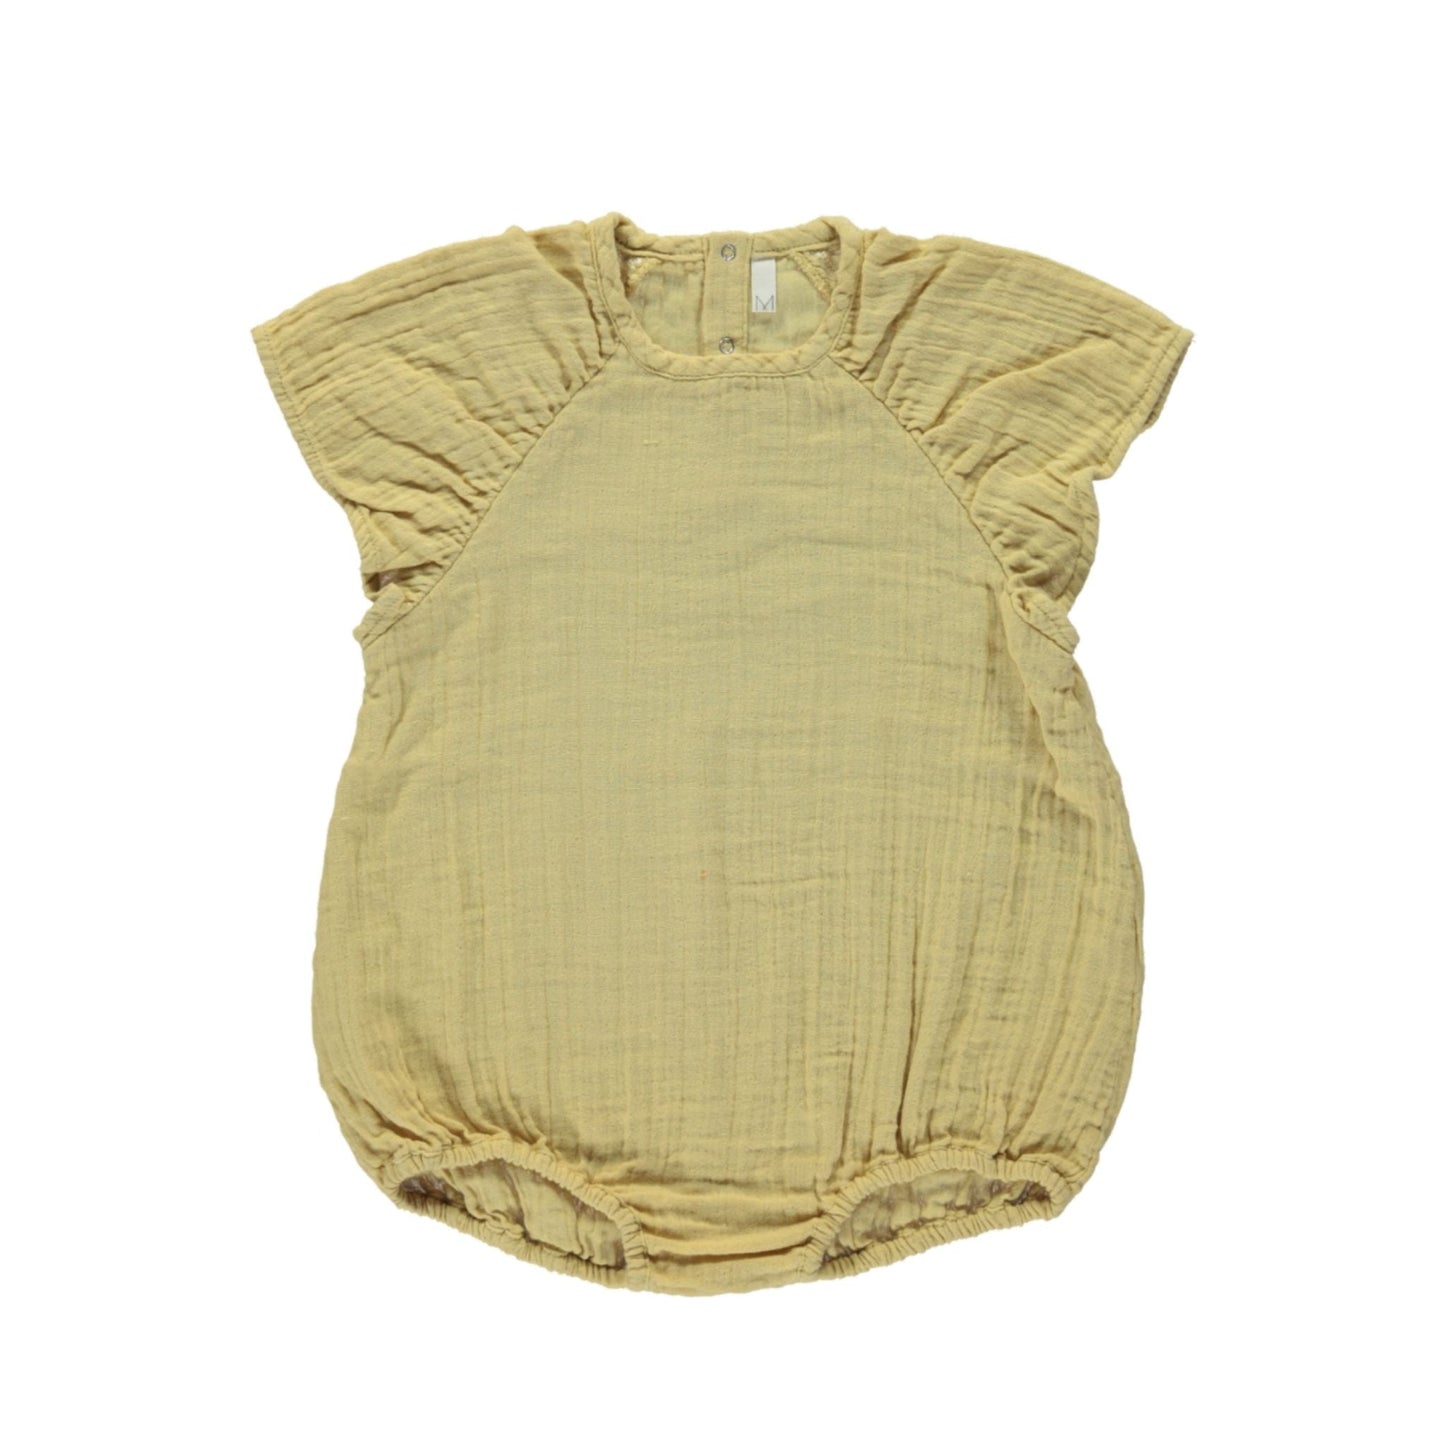 Hive Puff Overall Baby Grows MonKind 